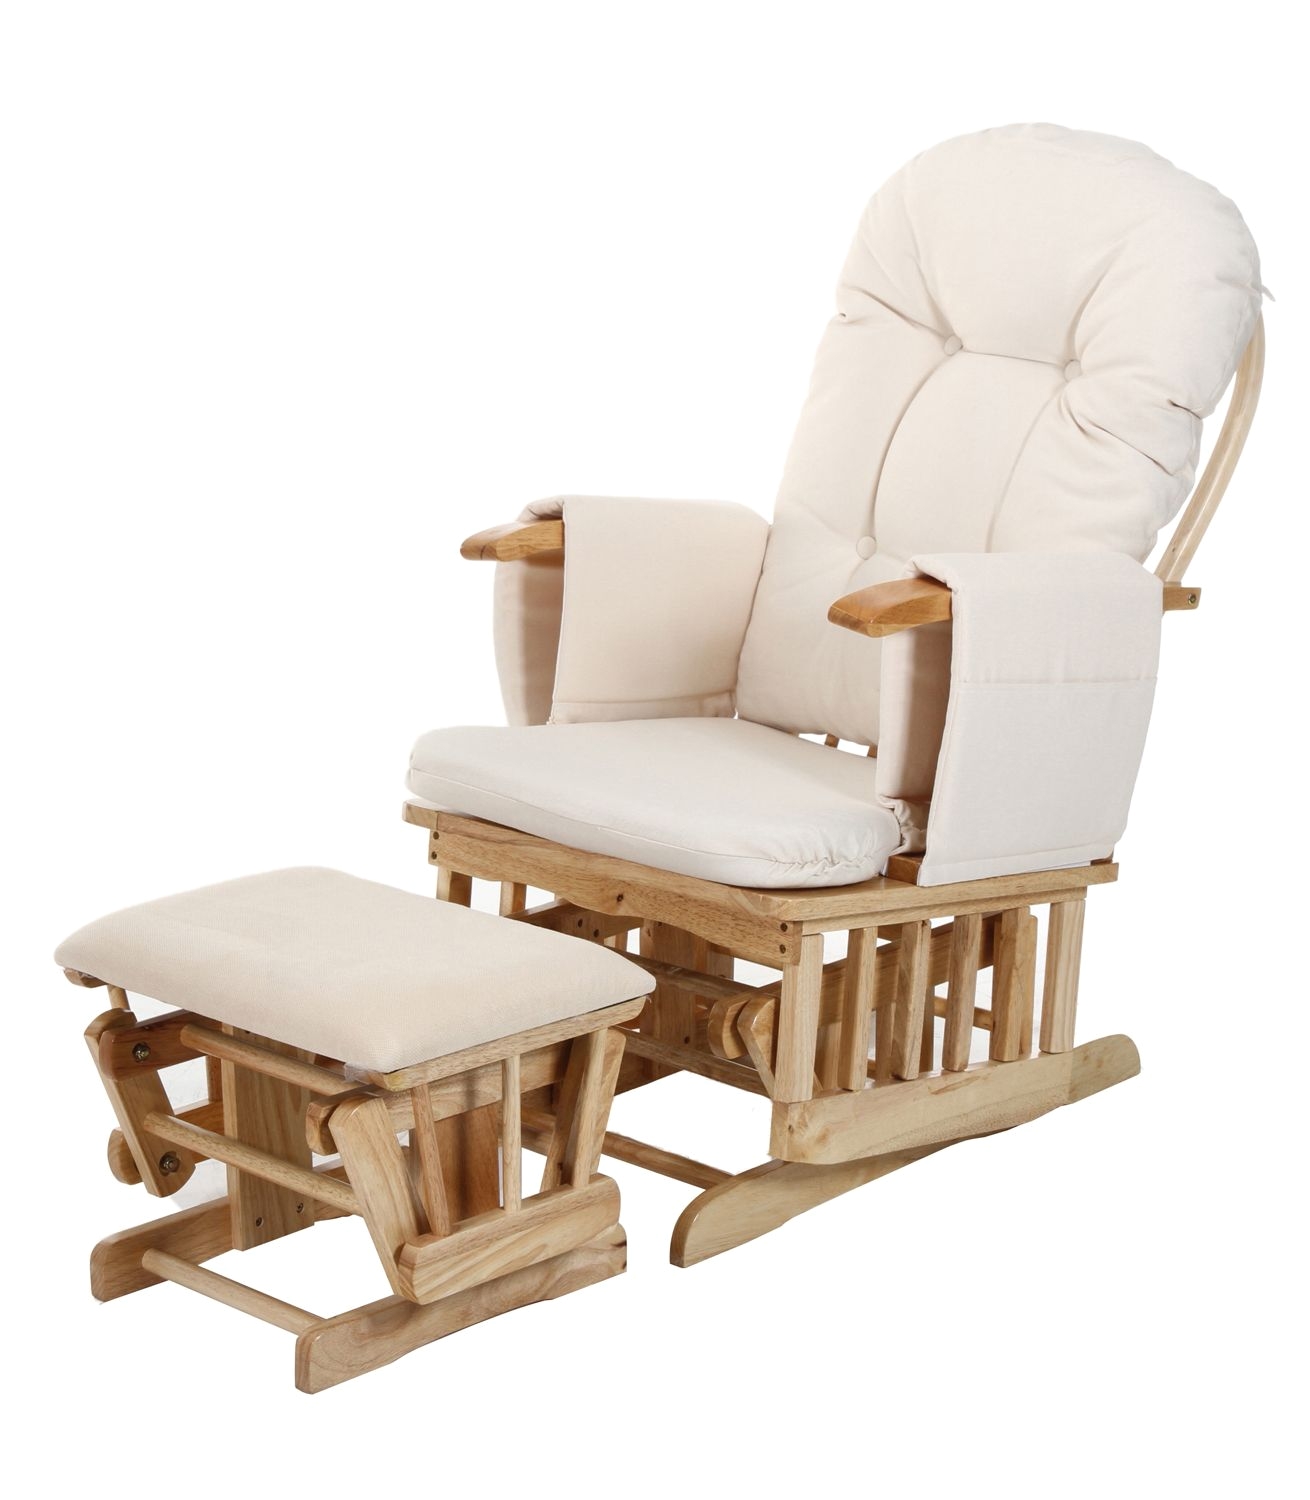 buy your baby weavers recline glider stool from kiddicare nursing chairs online baby shop nursery equipment